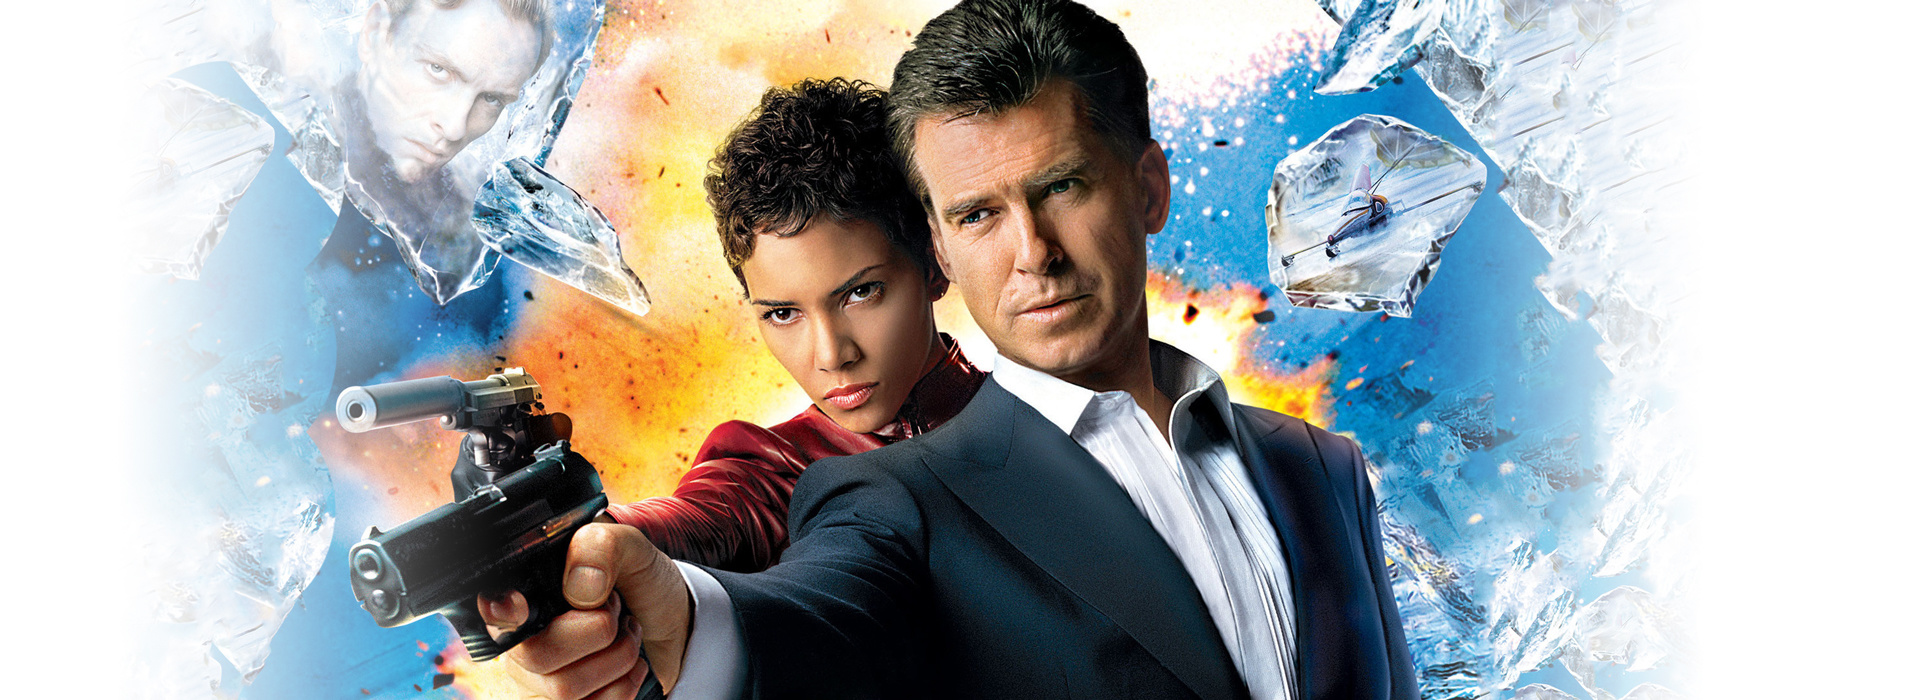 Movie poster Die Another Day